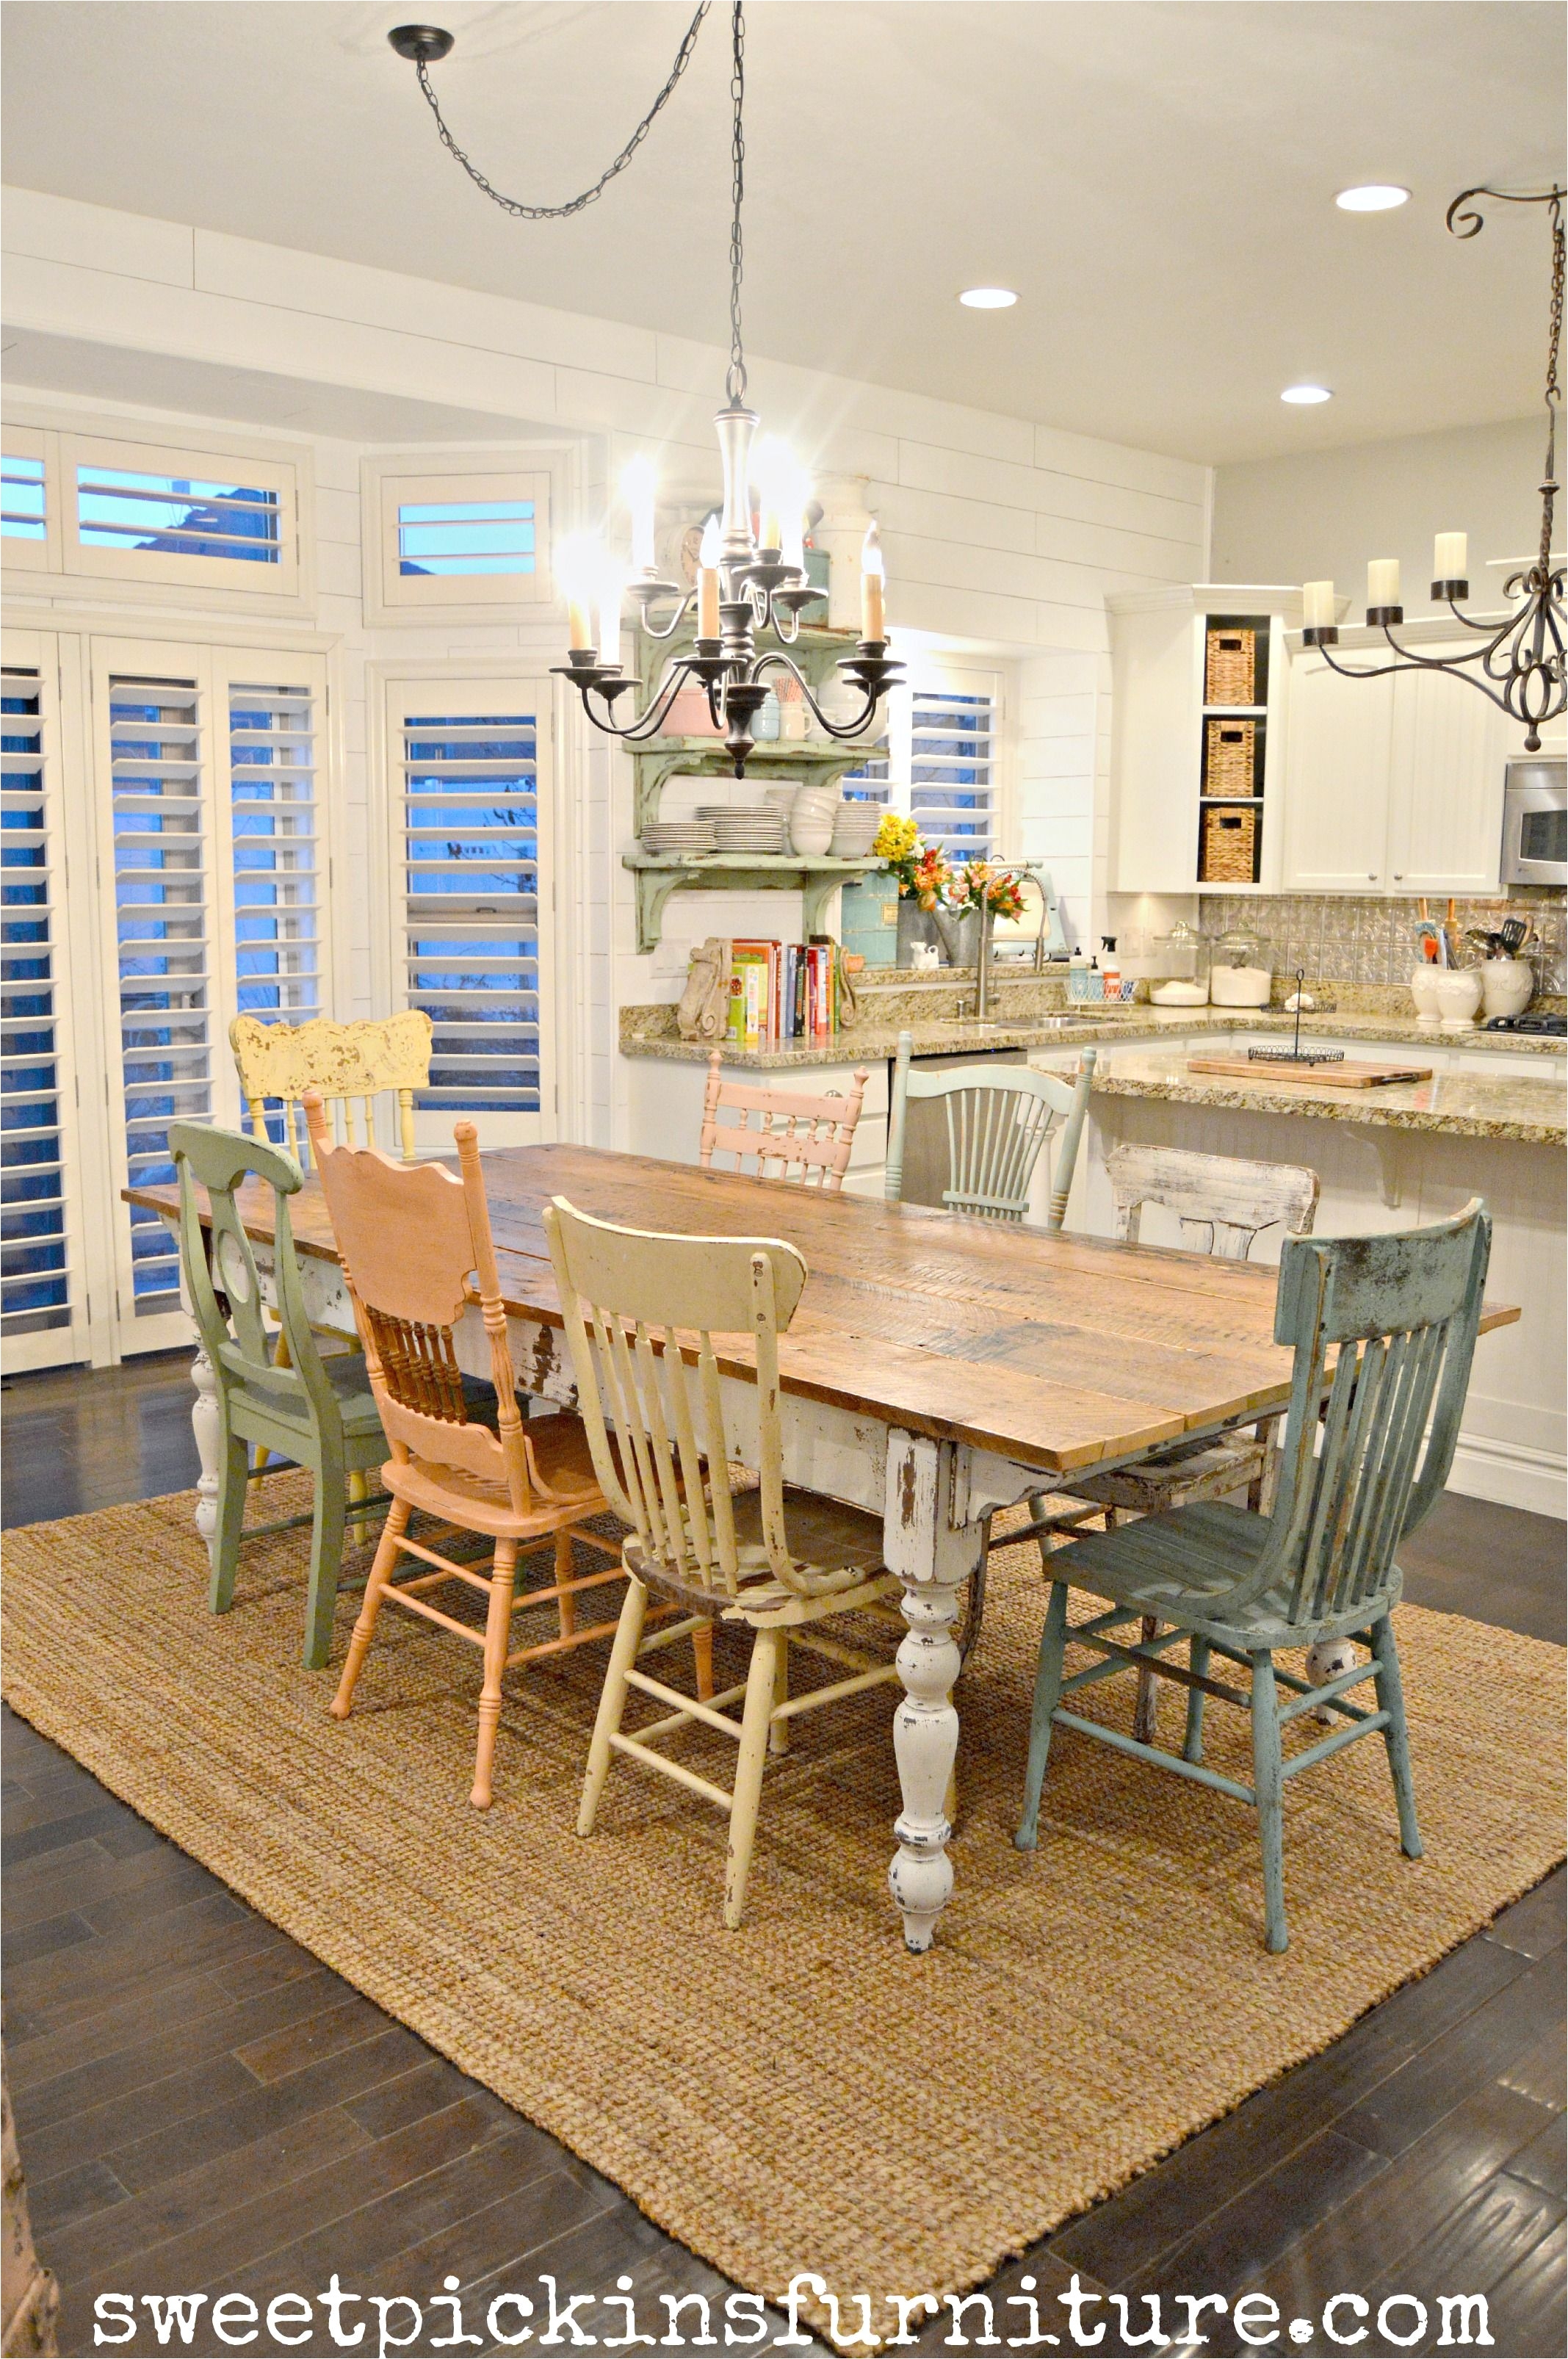 Xenia Anna White Linen Chair and A Half In White Linen Farmhouse Kitchen How to Style Your Kitchen Like One Ana